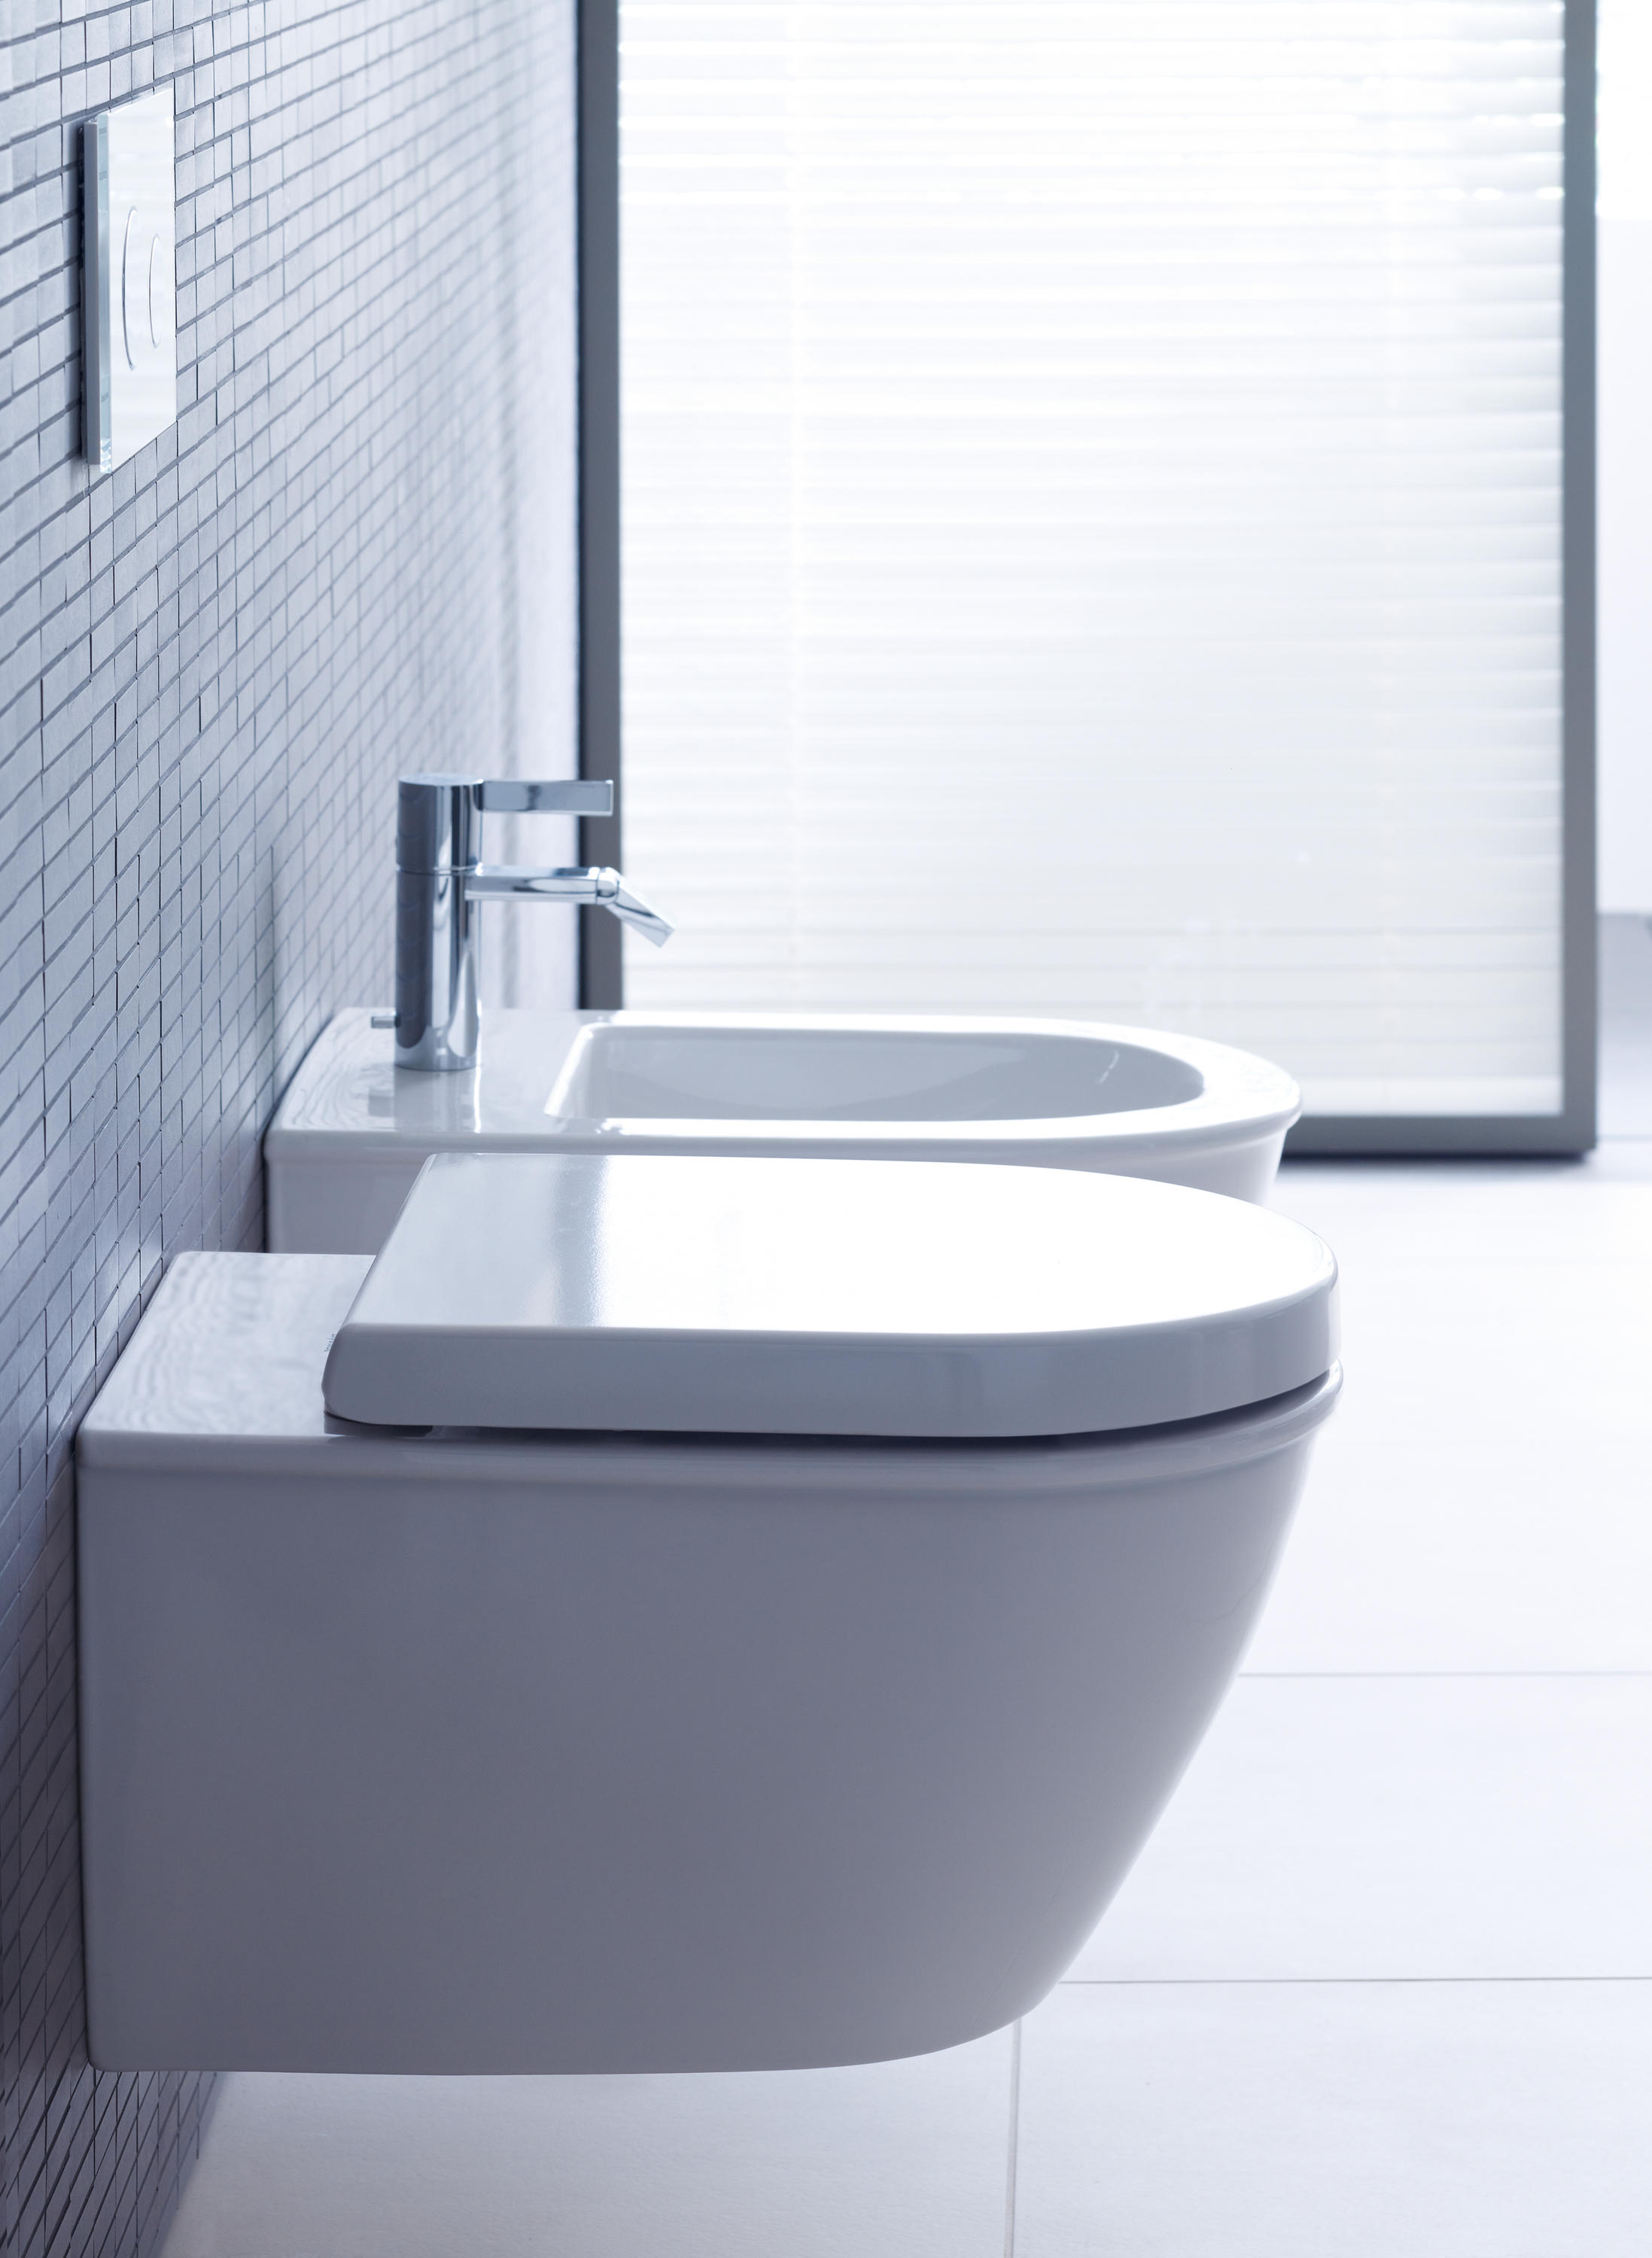 Darling New wall-mounted toilet | Architonic